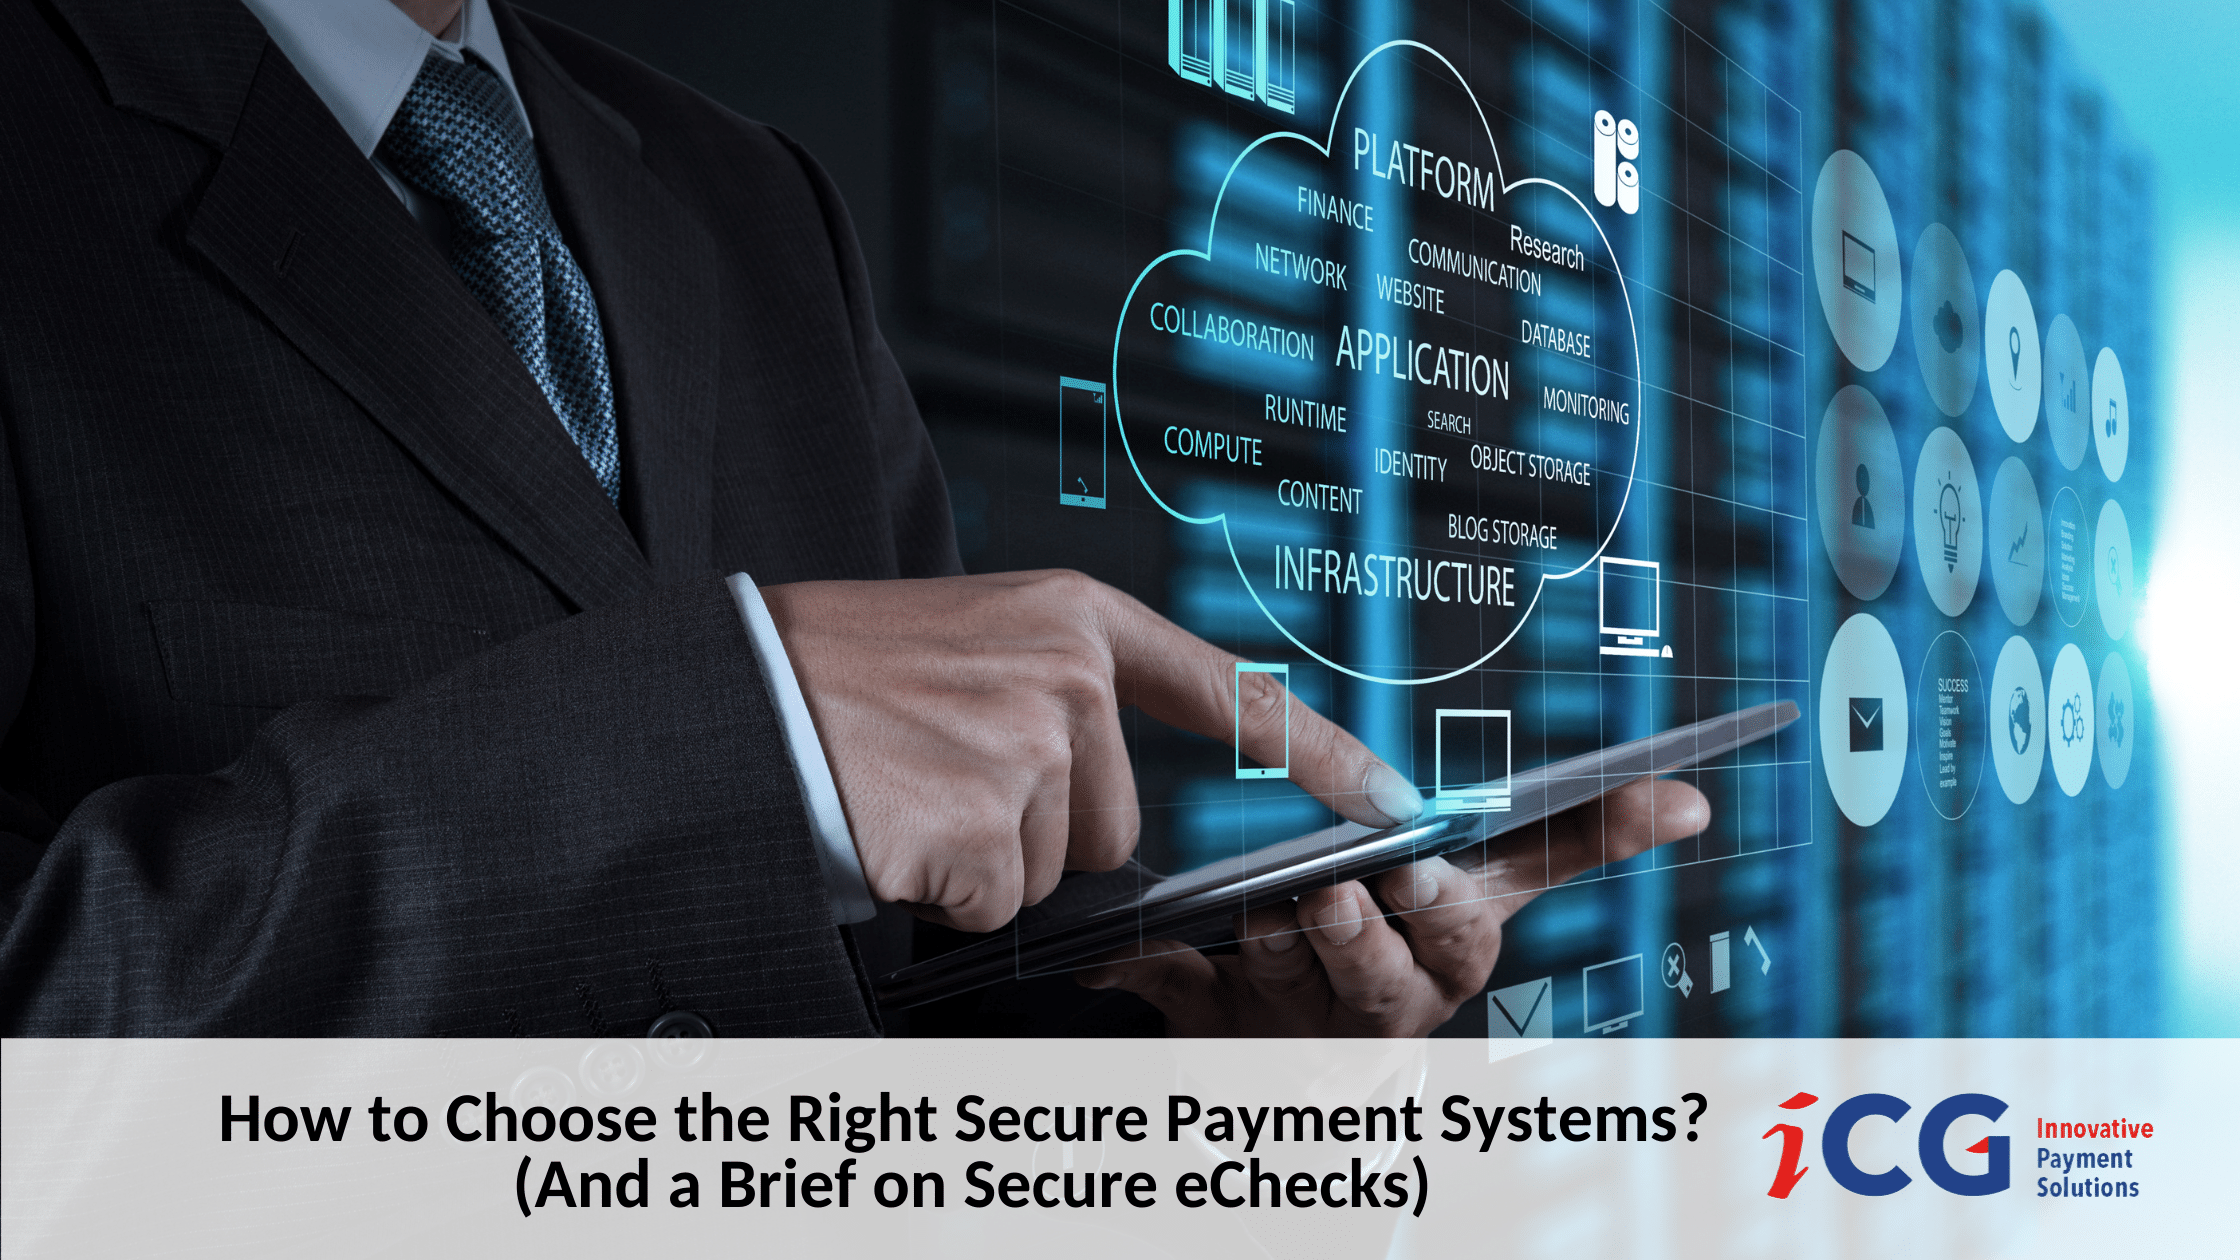 How to Choose the Right Secure Payment Systems? (And a Brief on Secure eChecks)